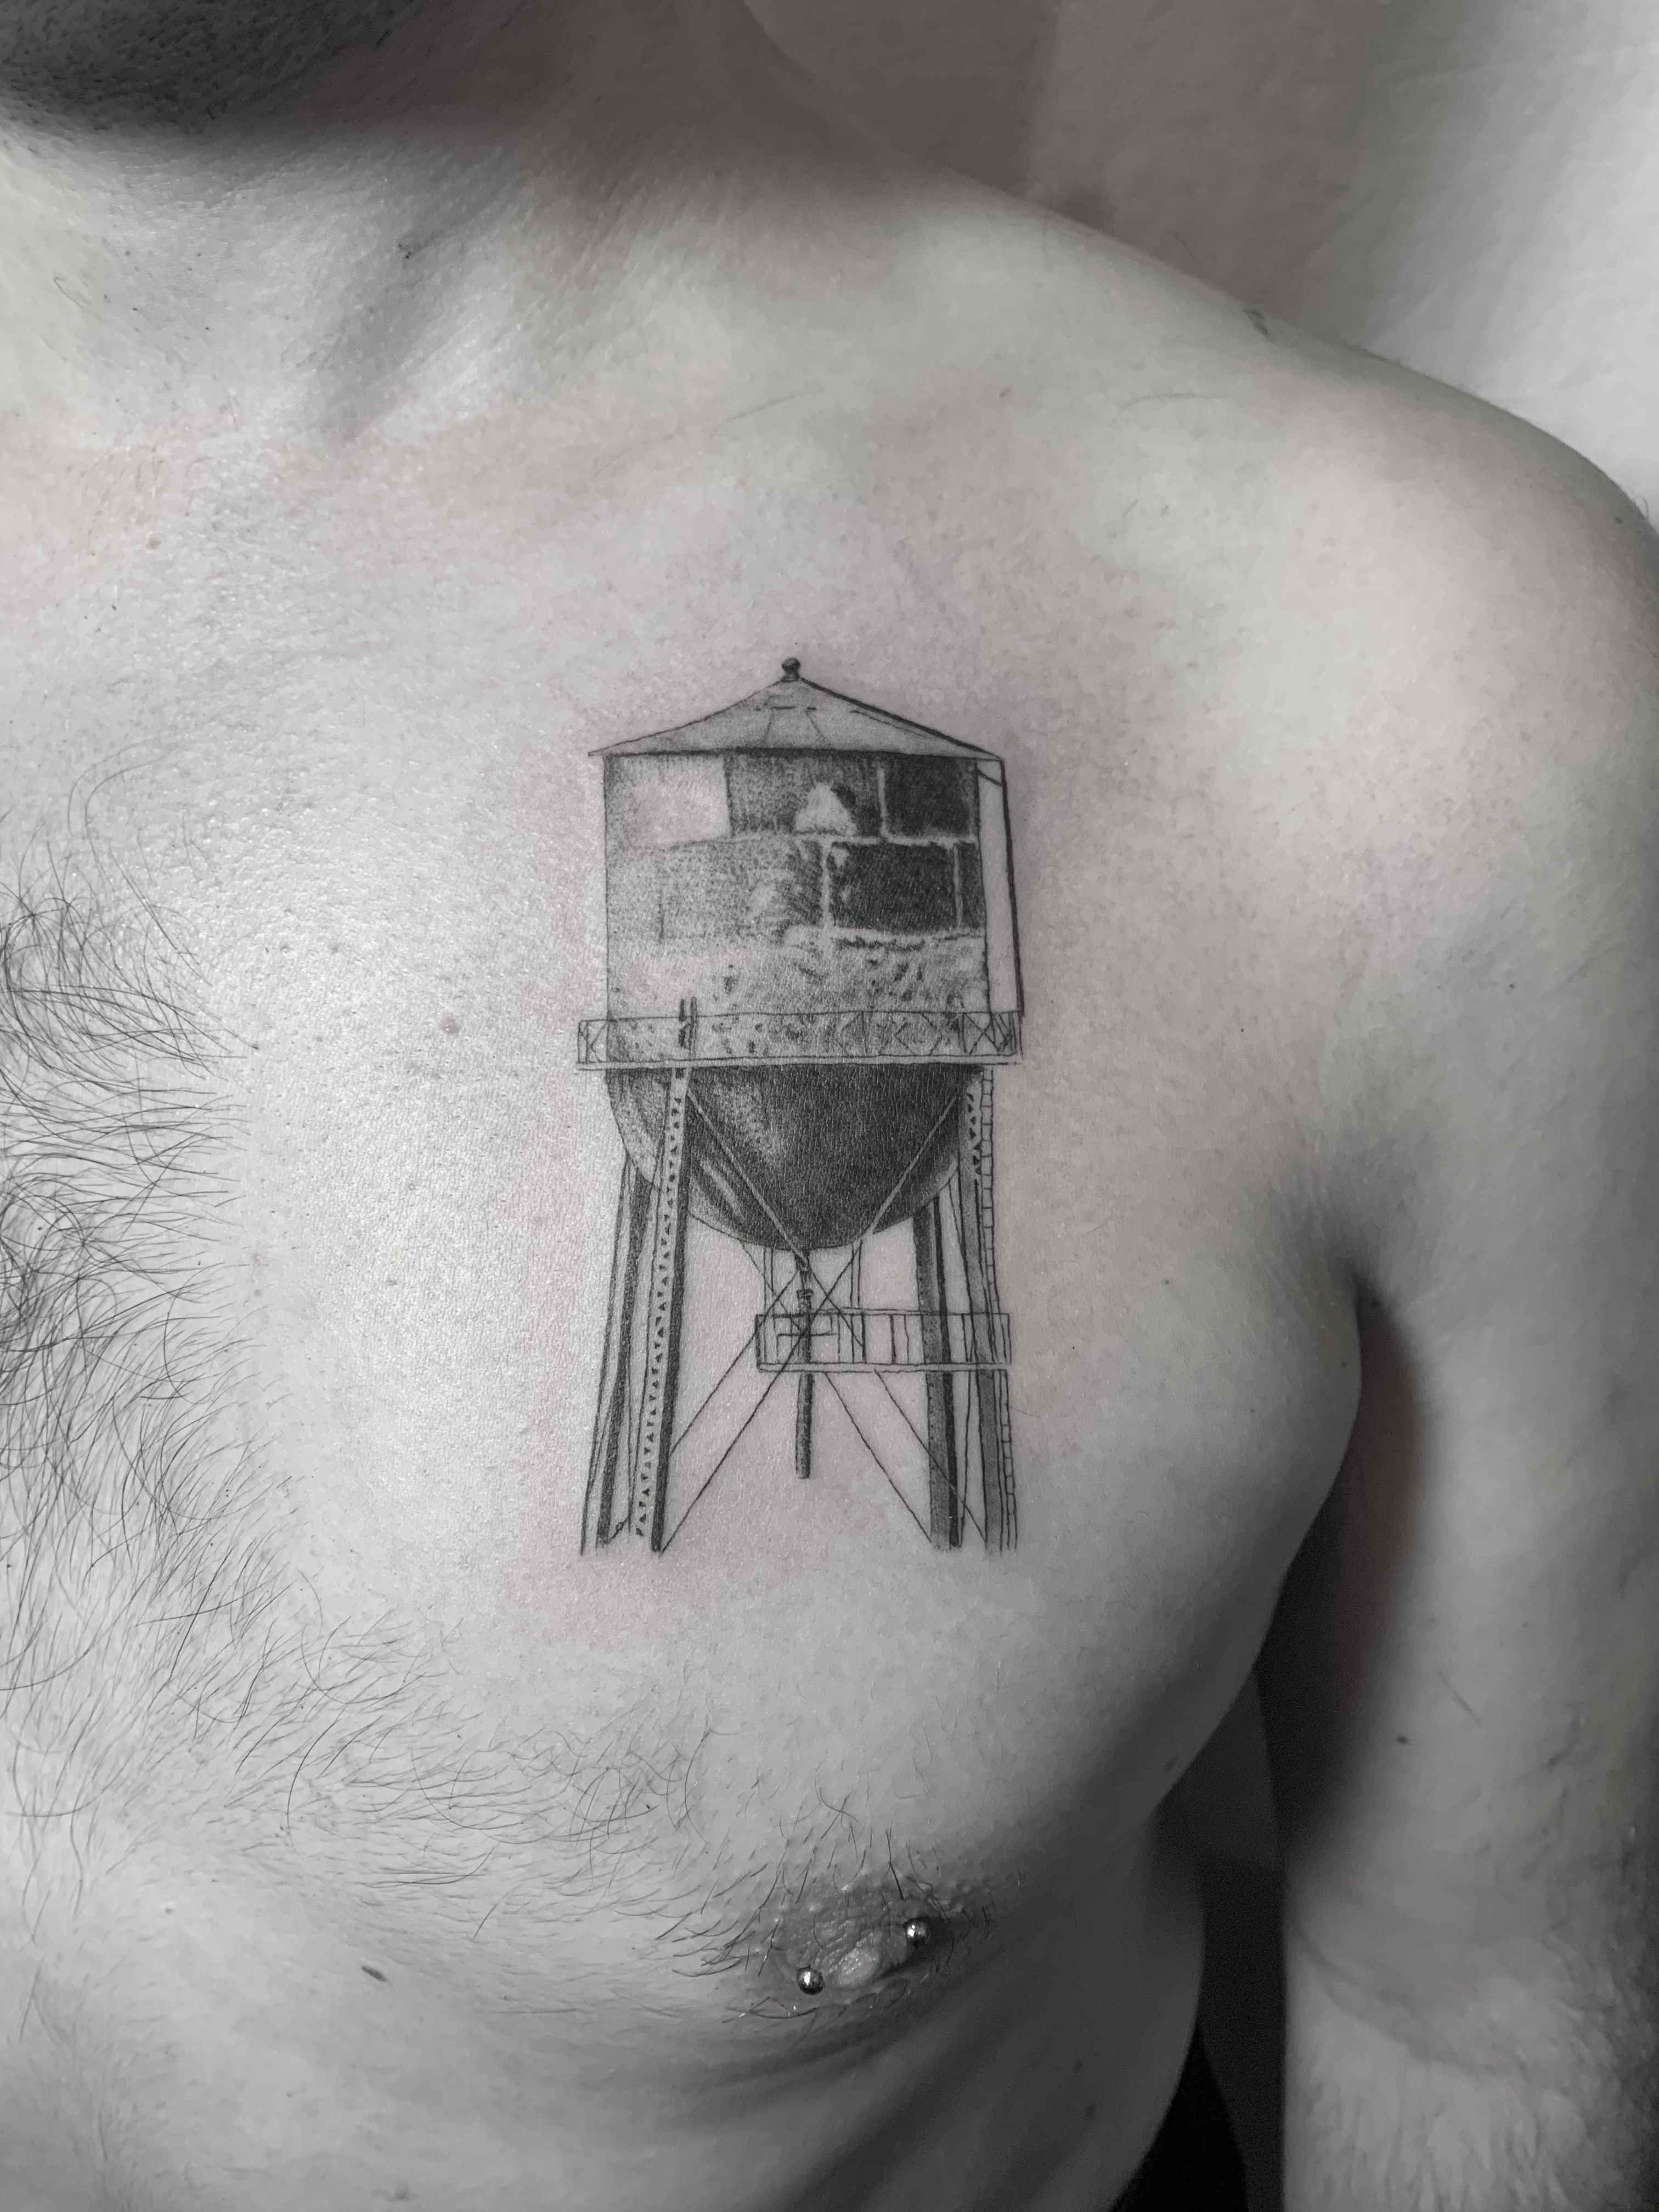 downtown orange county water tower tattoo  Tattoos Water tower Cool  tattoos